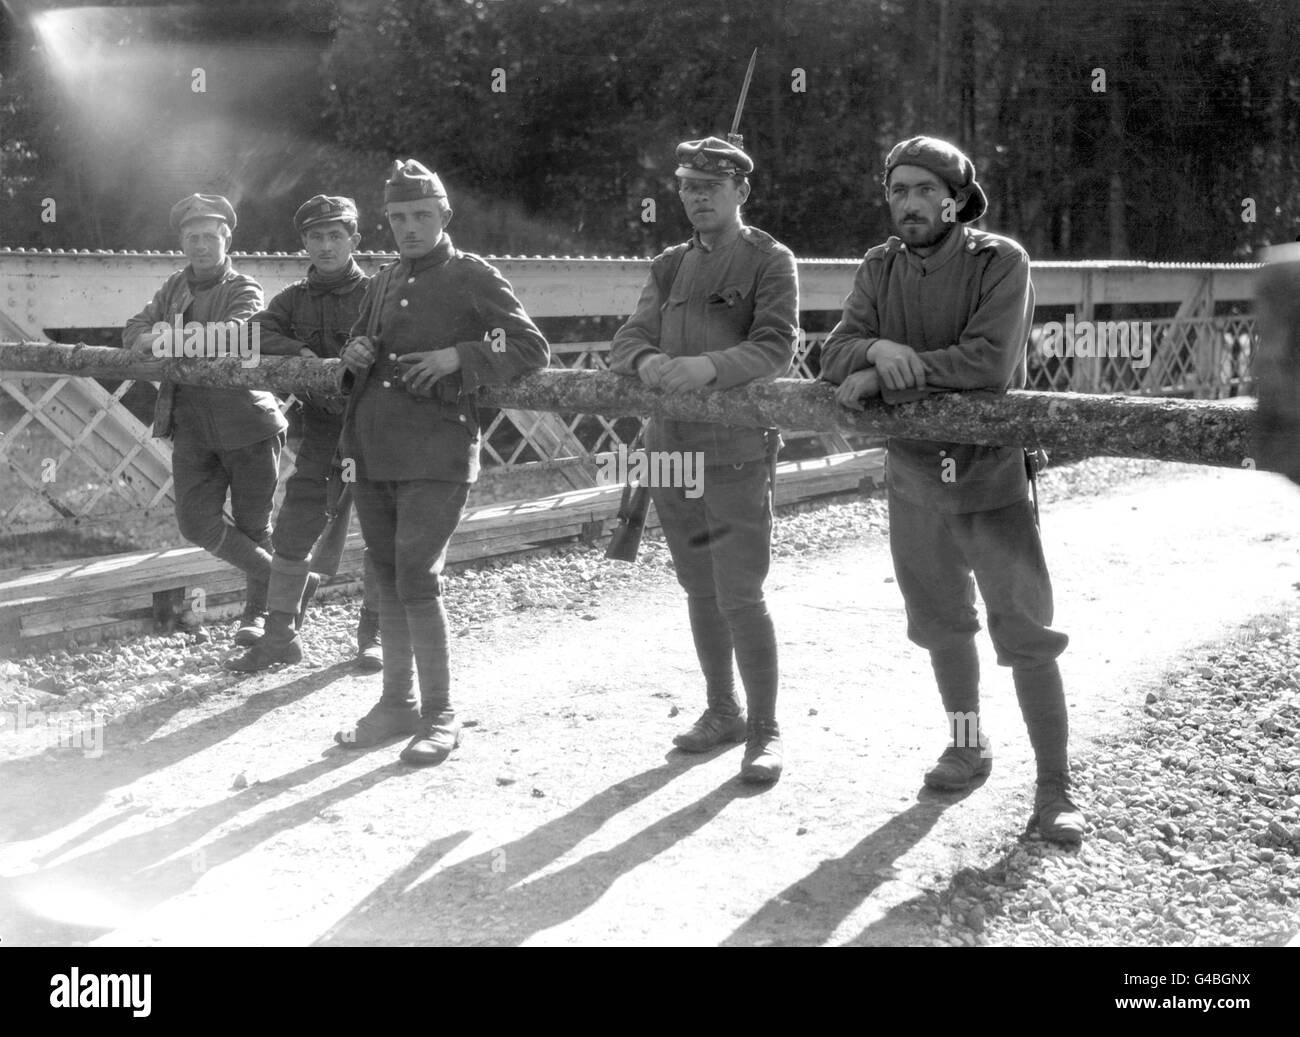 Czechoslovak Army guards and a former member of the famous Czech Legion (right, wearing beret) on duty at the frontier between Czechoslovakia and Hungary. Stock Photo